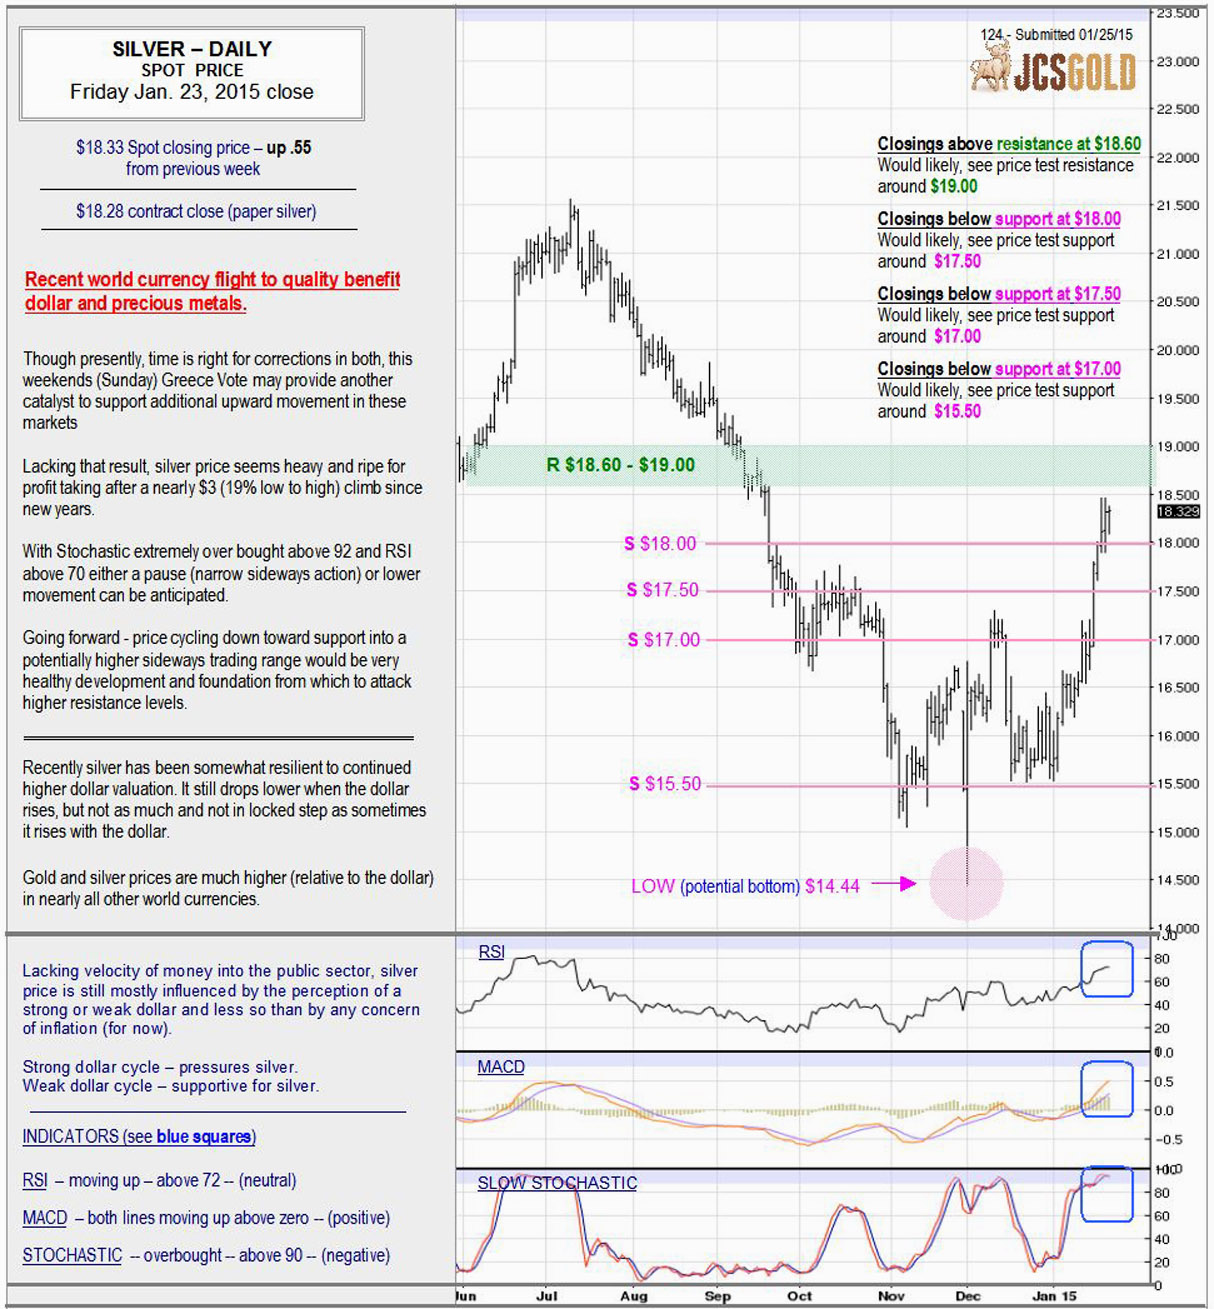 Jan 23, 2015 chart & commentary